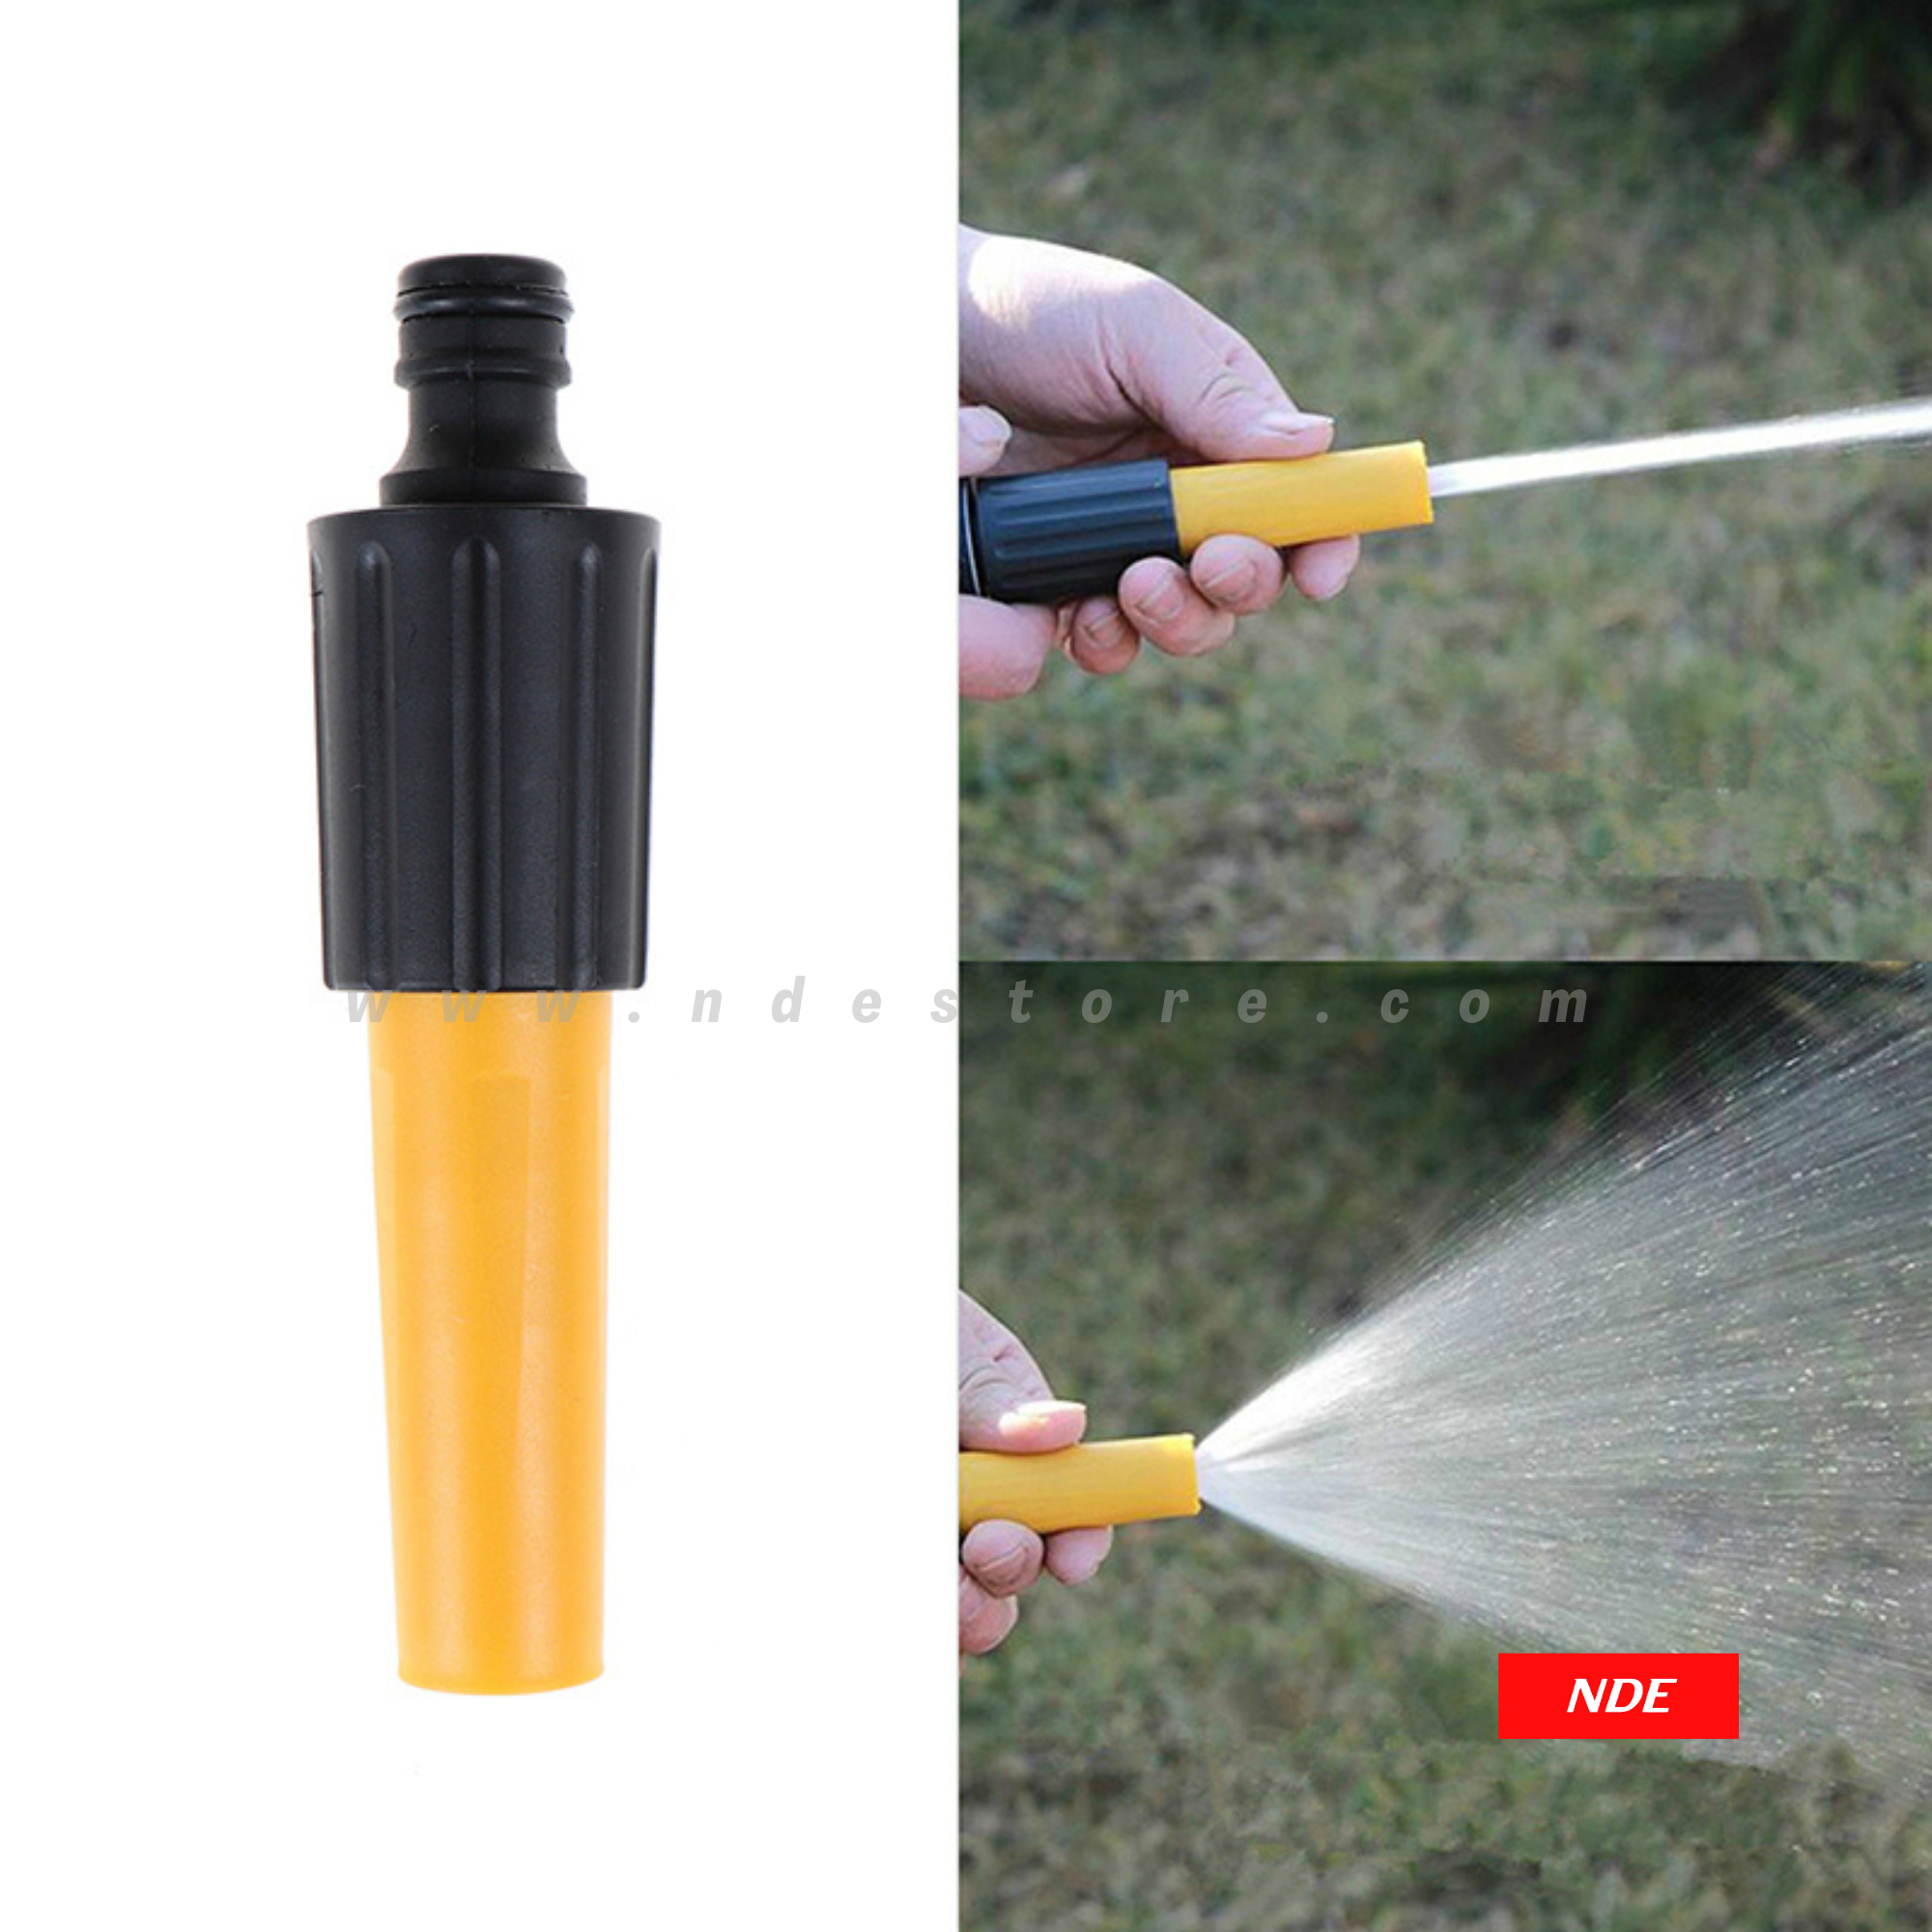 WATER SPRAY HOSE FOR CASH WASH AND CLEANING PURPOSE